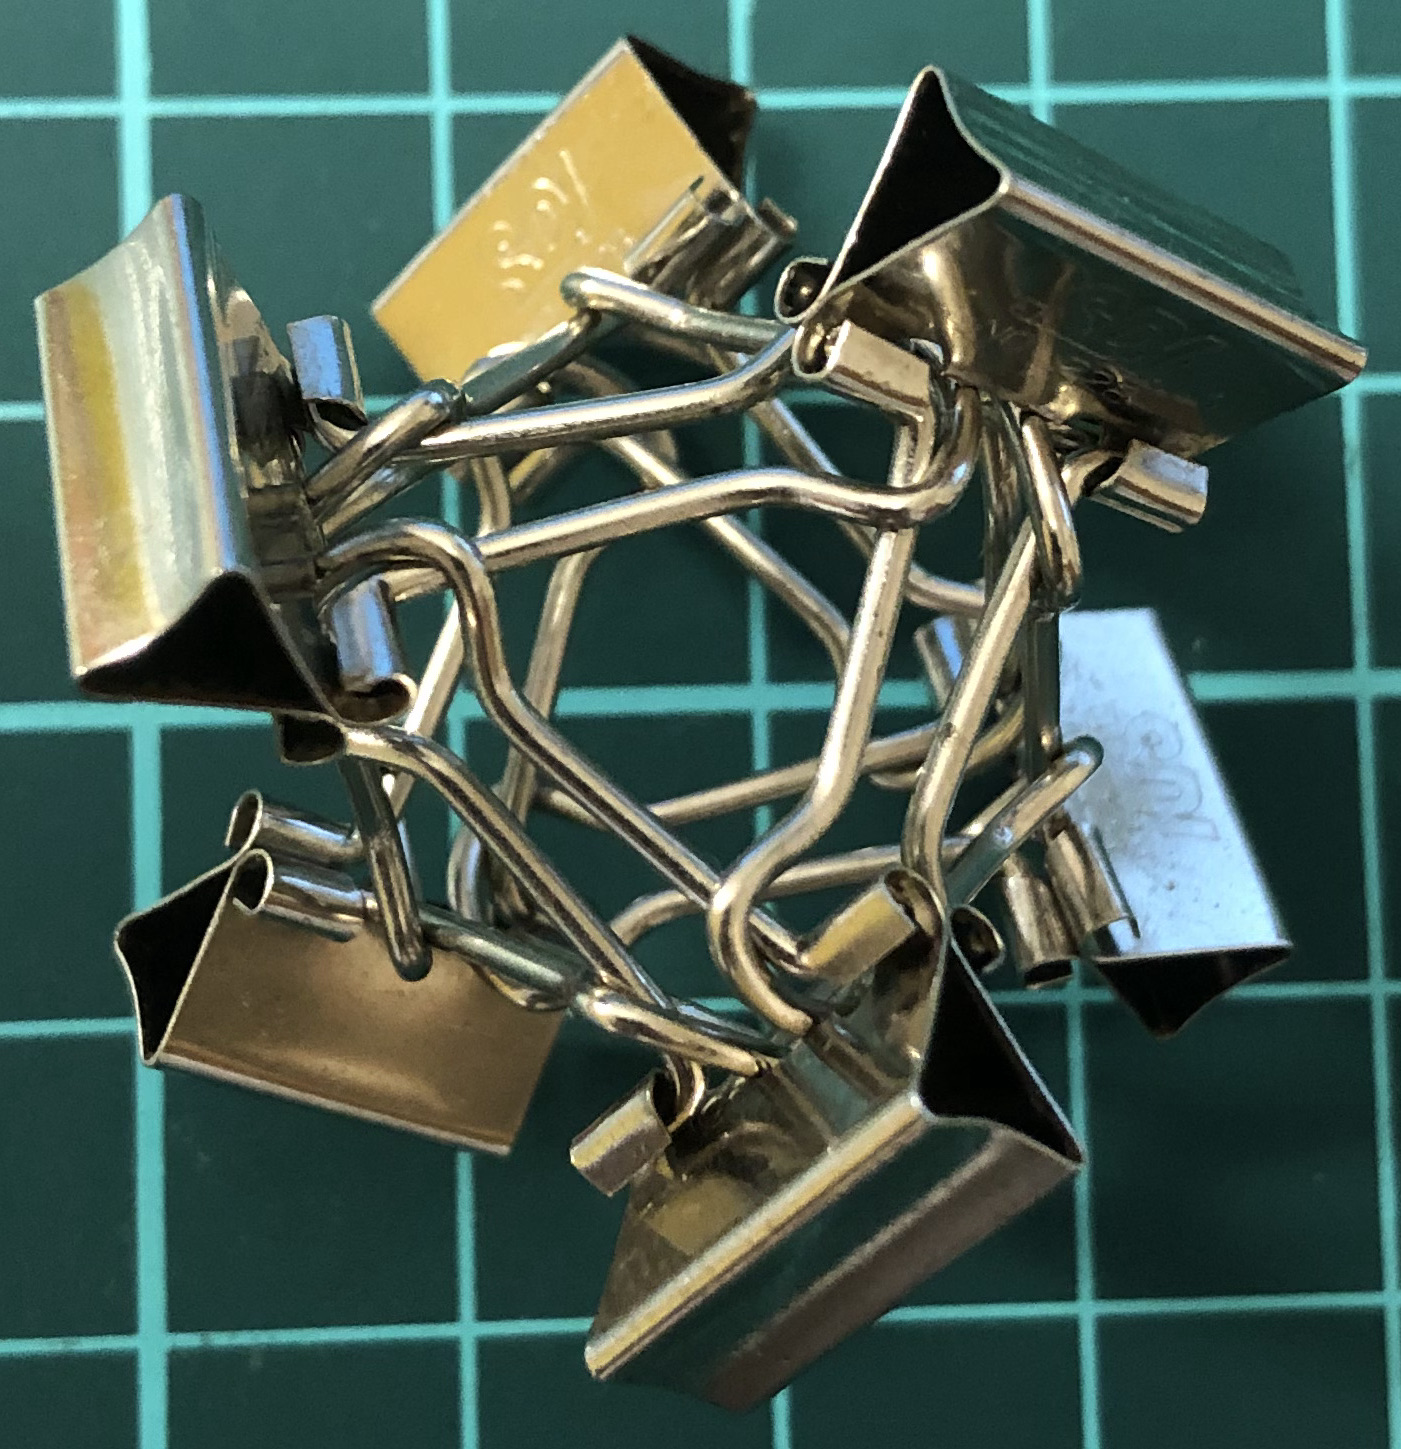 6 binder clips whose bodies stand on the octahedron formed by handles